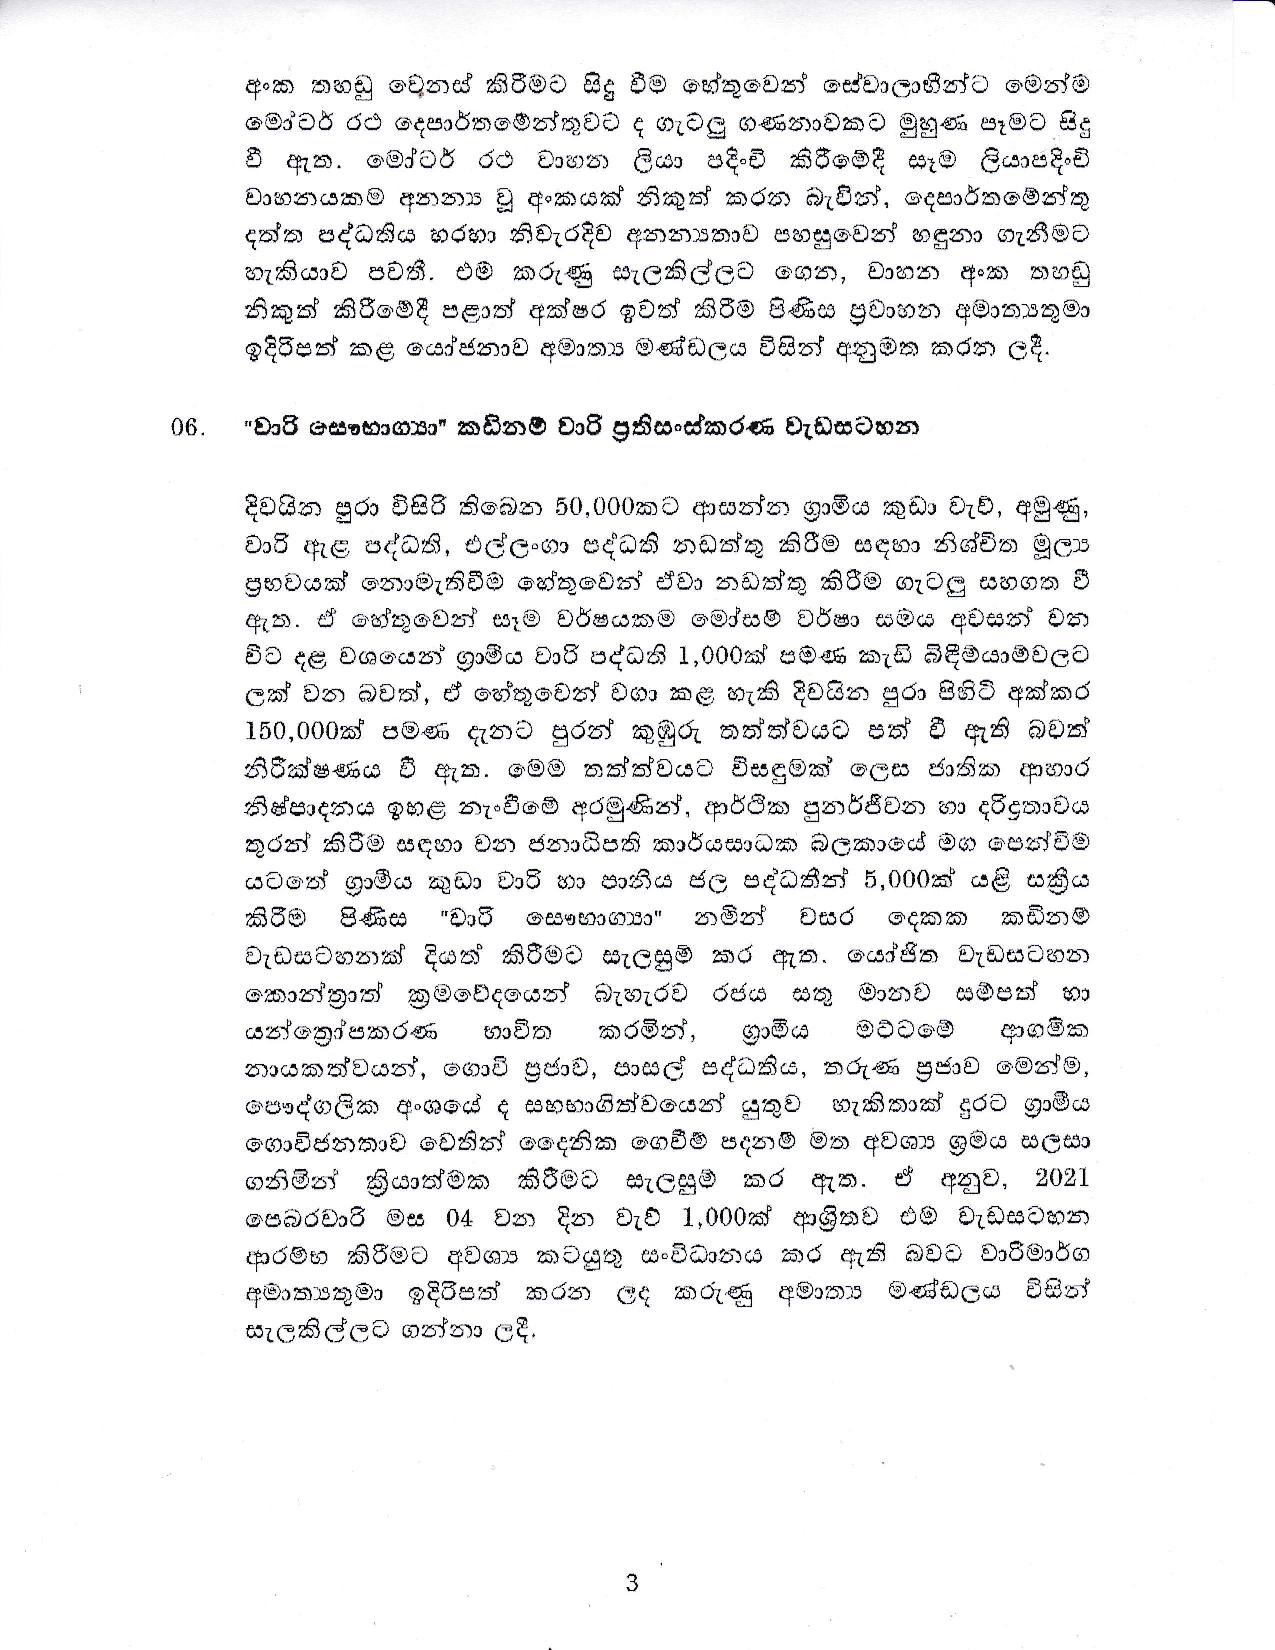 Cabinet Decision on 14.12.2020 page 003